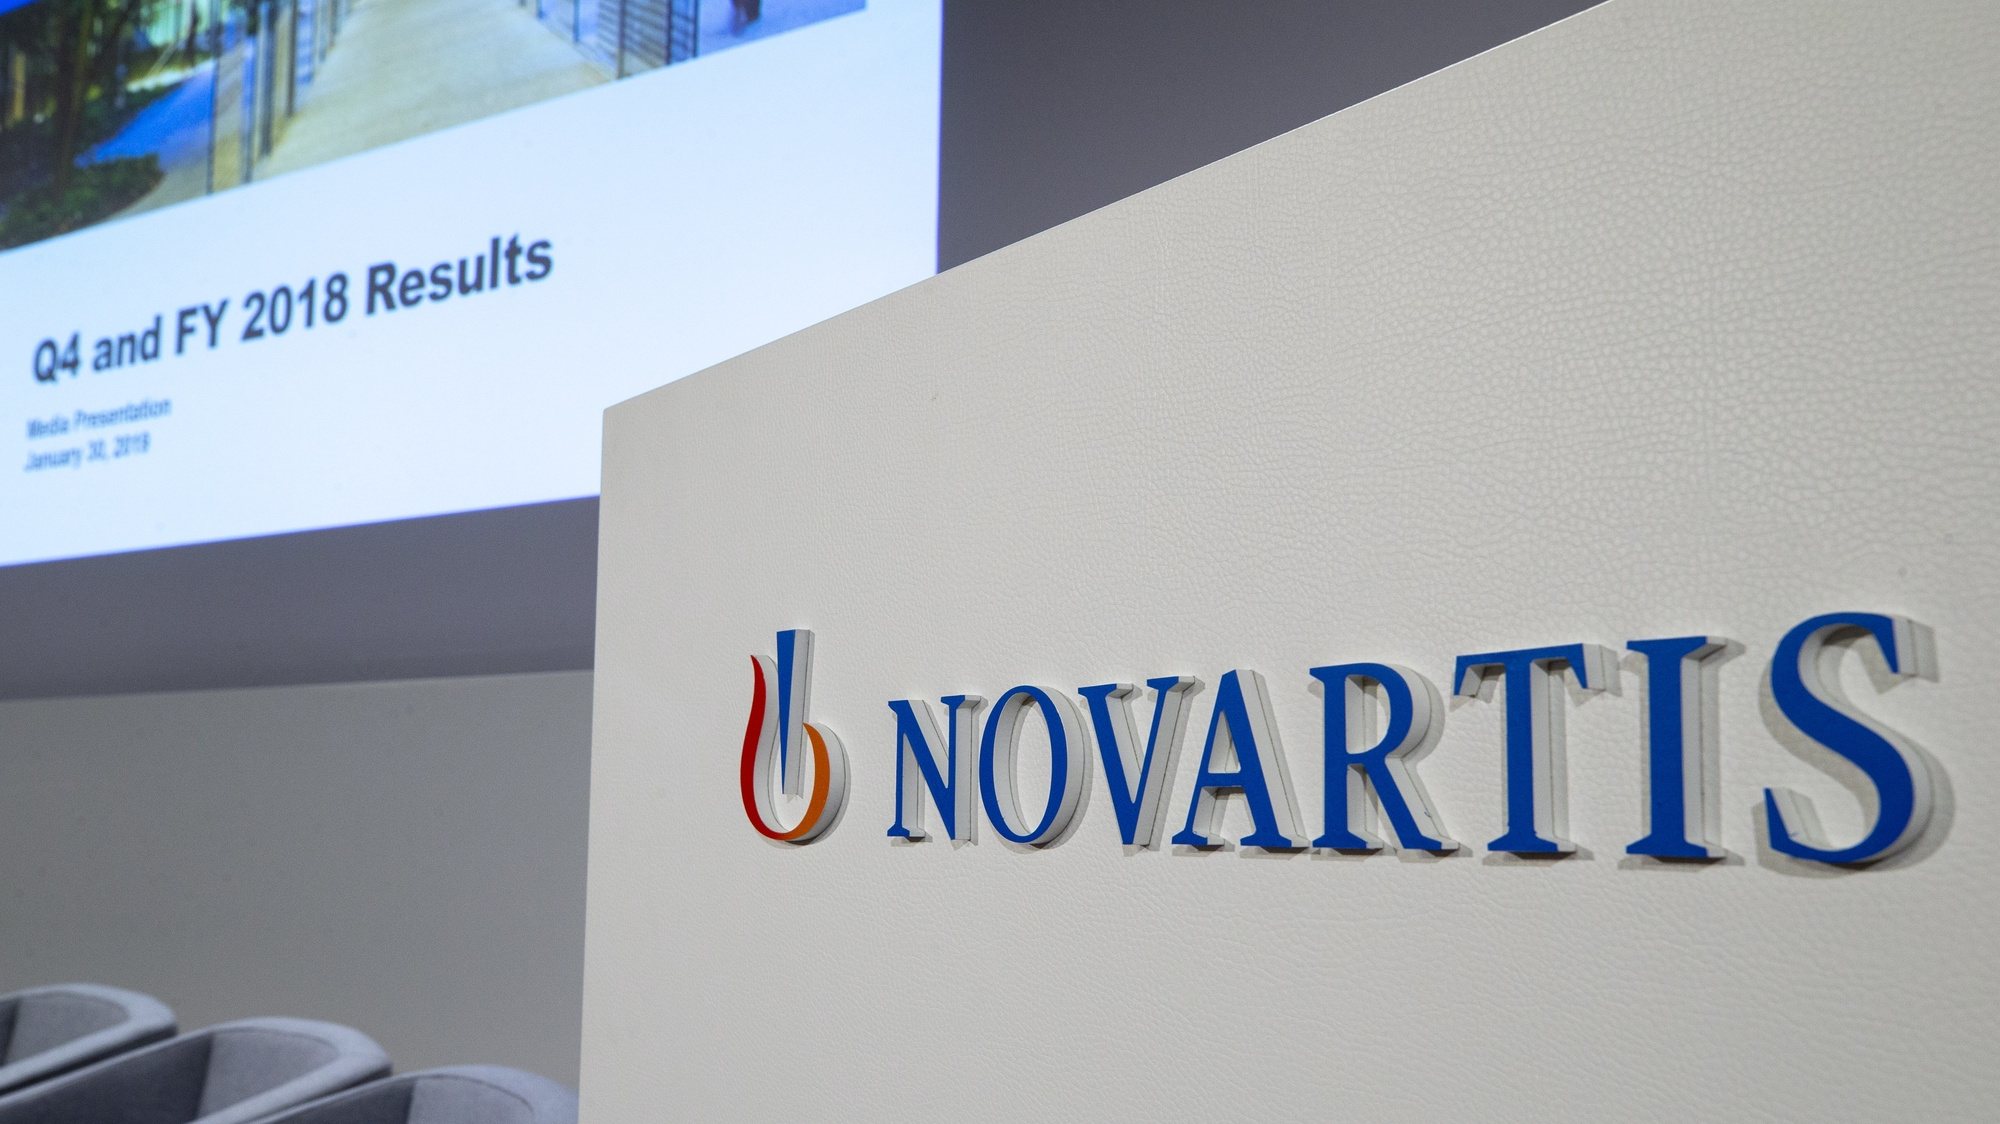 epa08324992 (FILE) - The Logo of Swiss pharmaceutical group Novartis, captured prior the annual results media conference at the Novartis Campus in Basel, Switzerland, 30 January 2019 (reissued 26 March 2020). On 26 March 2020, Basel-based pharmaceutical giant Novartis announced to have joined forces with the Bill &amp; Melinda Gates Foundation to fight the coronavirus pandemic.  EPA/PATRICK STRAUB